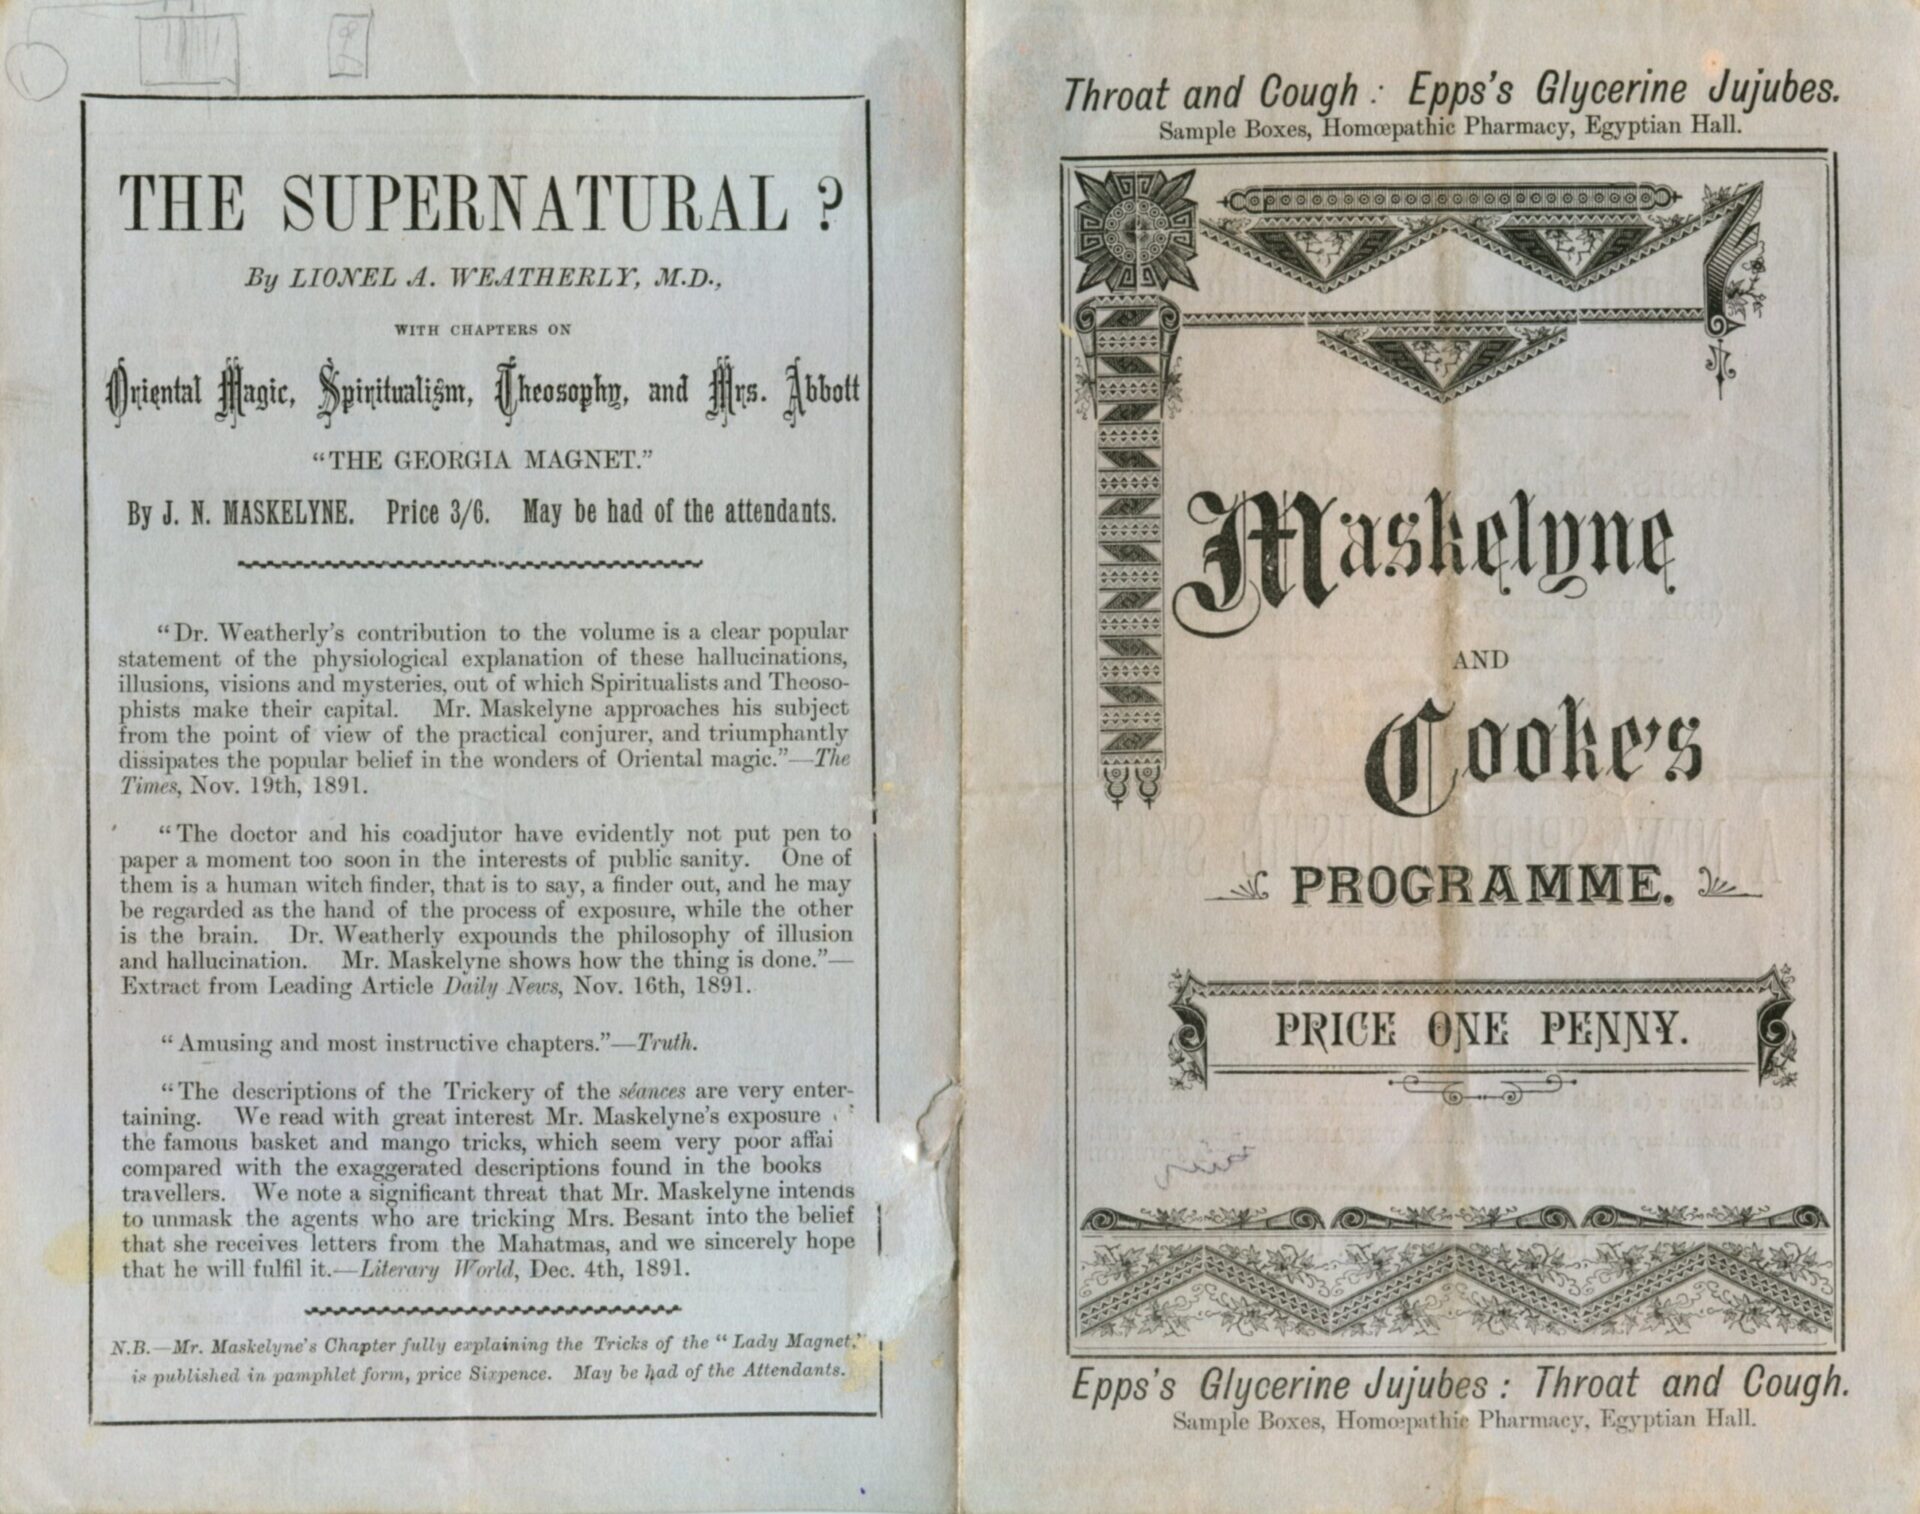 Maskelyne and Cooke programme for the Egyptian Hall, probably 19th consecutive year